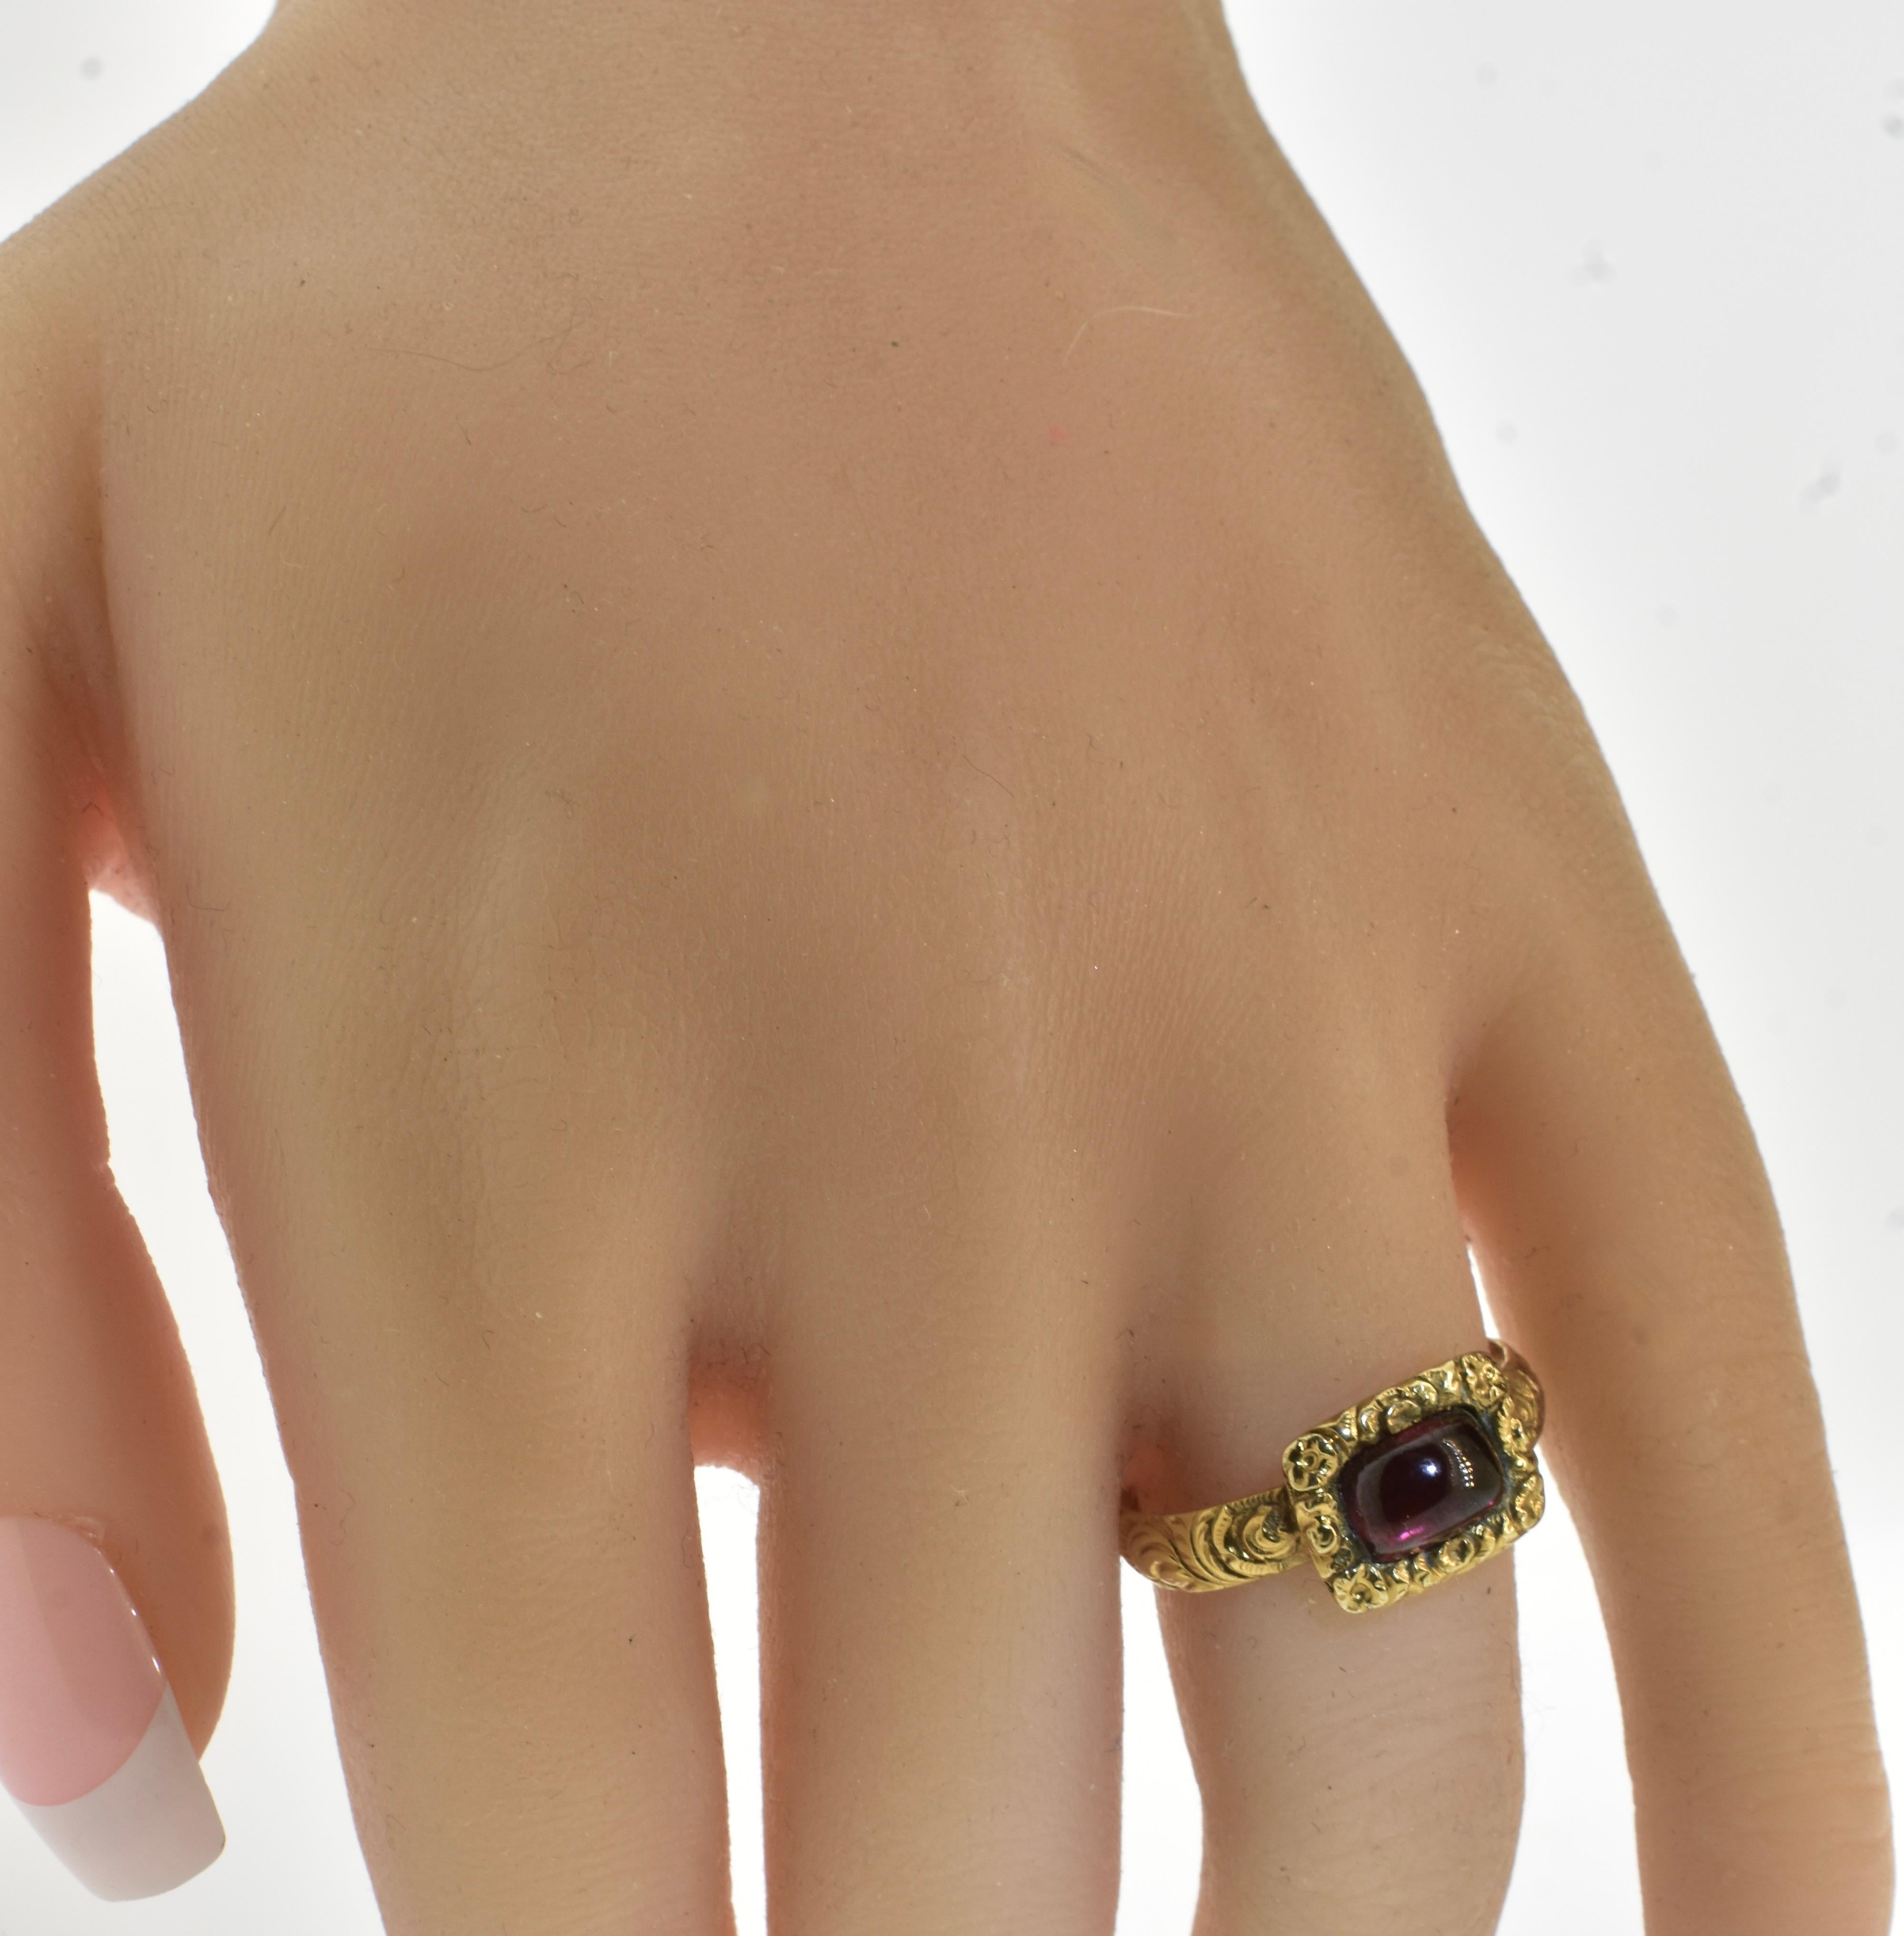 Antique 18K and Garnet Ring,  Inscribed and dated 1712-1765. 1